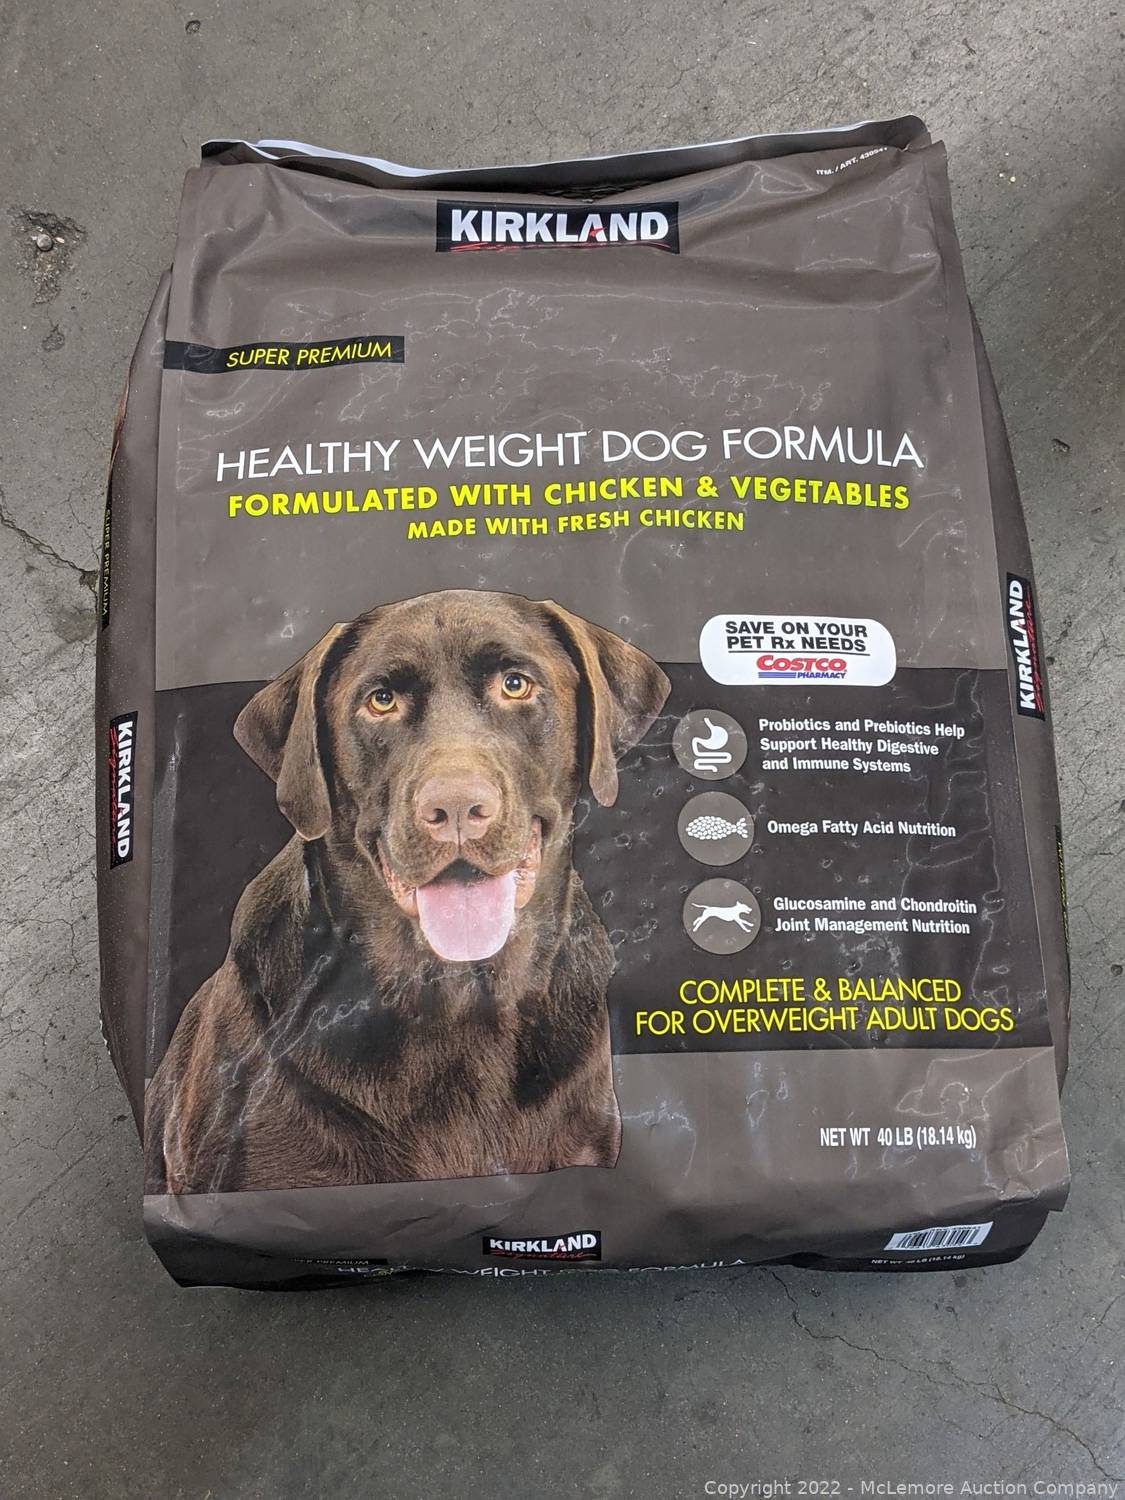 what are the ingredients in costco dog food